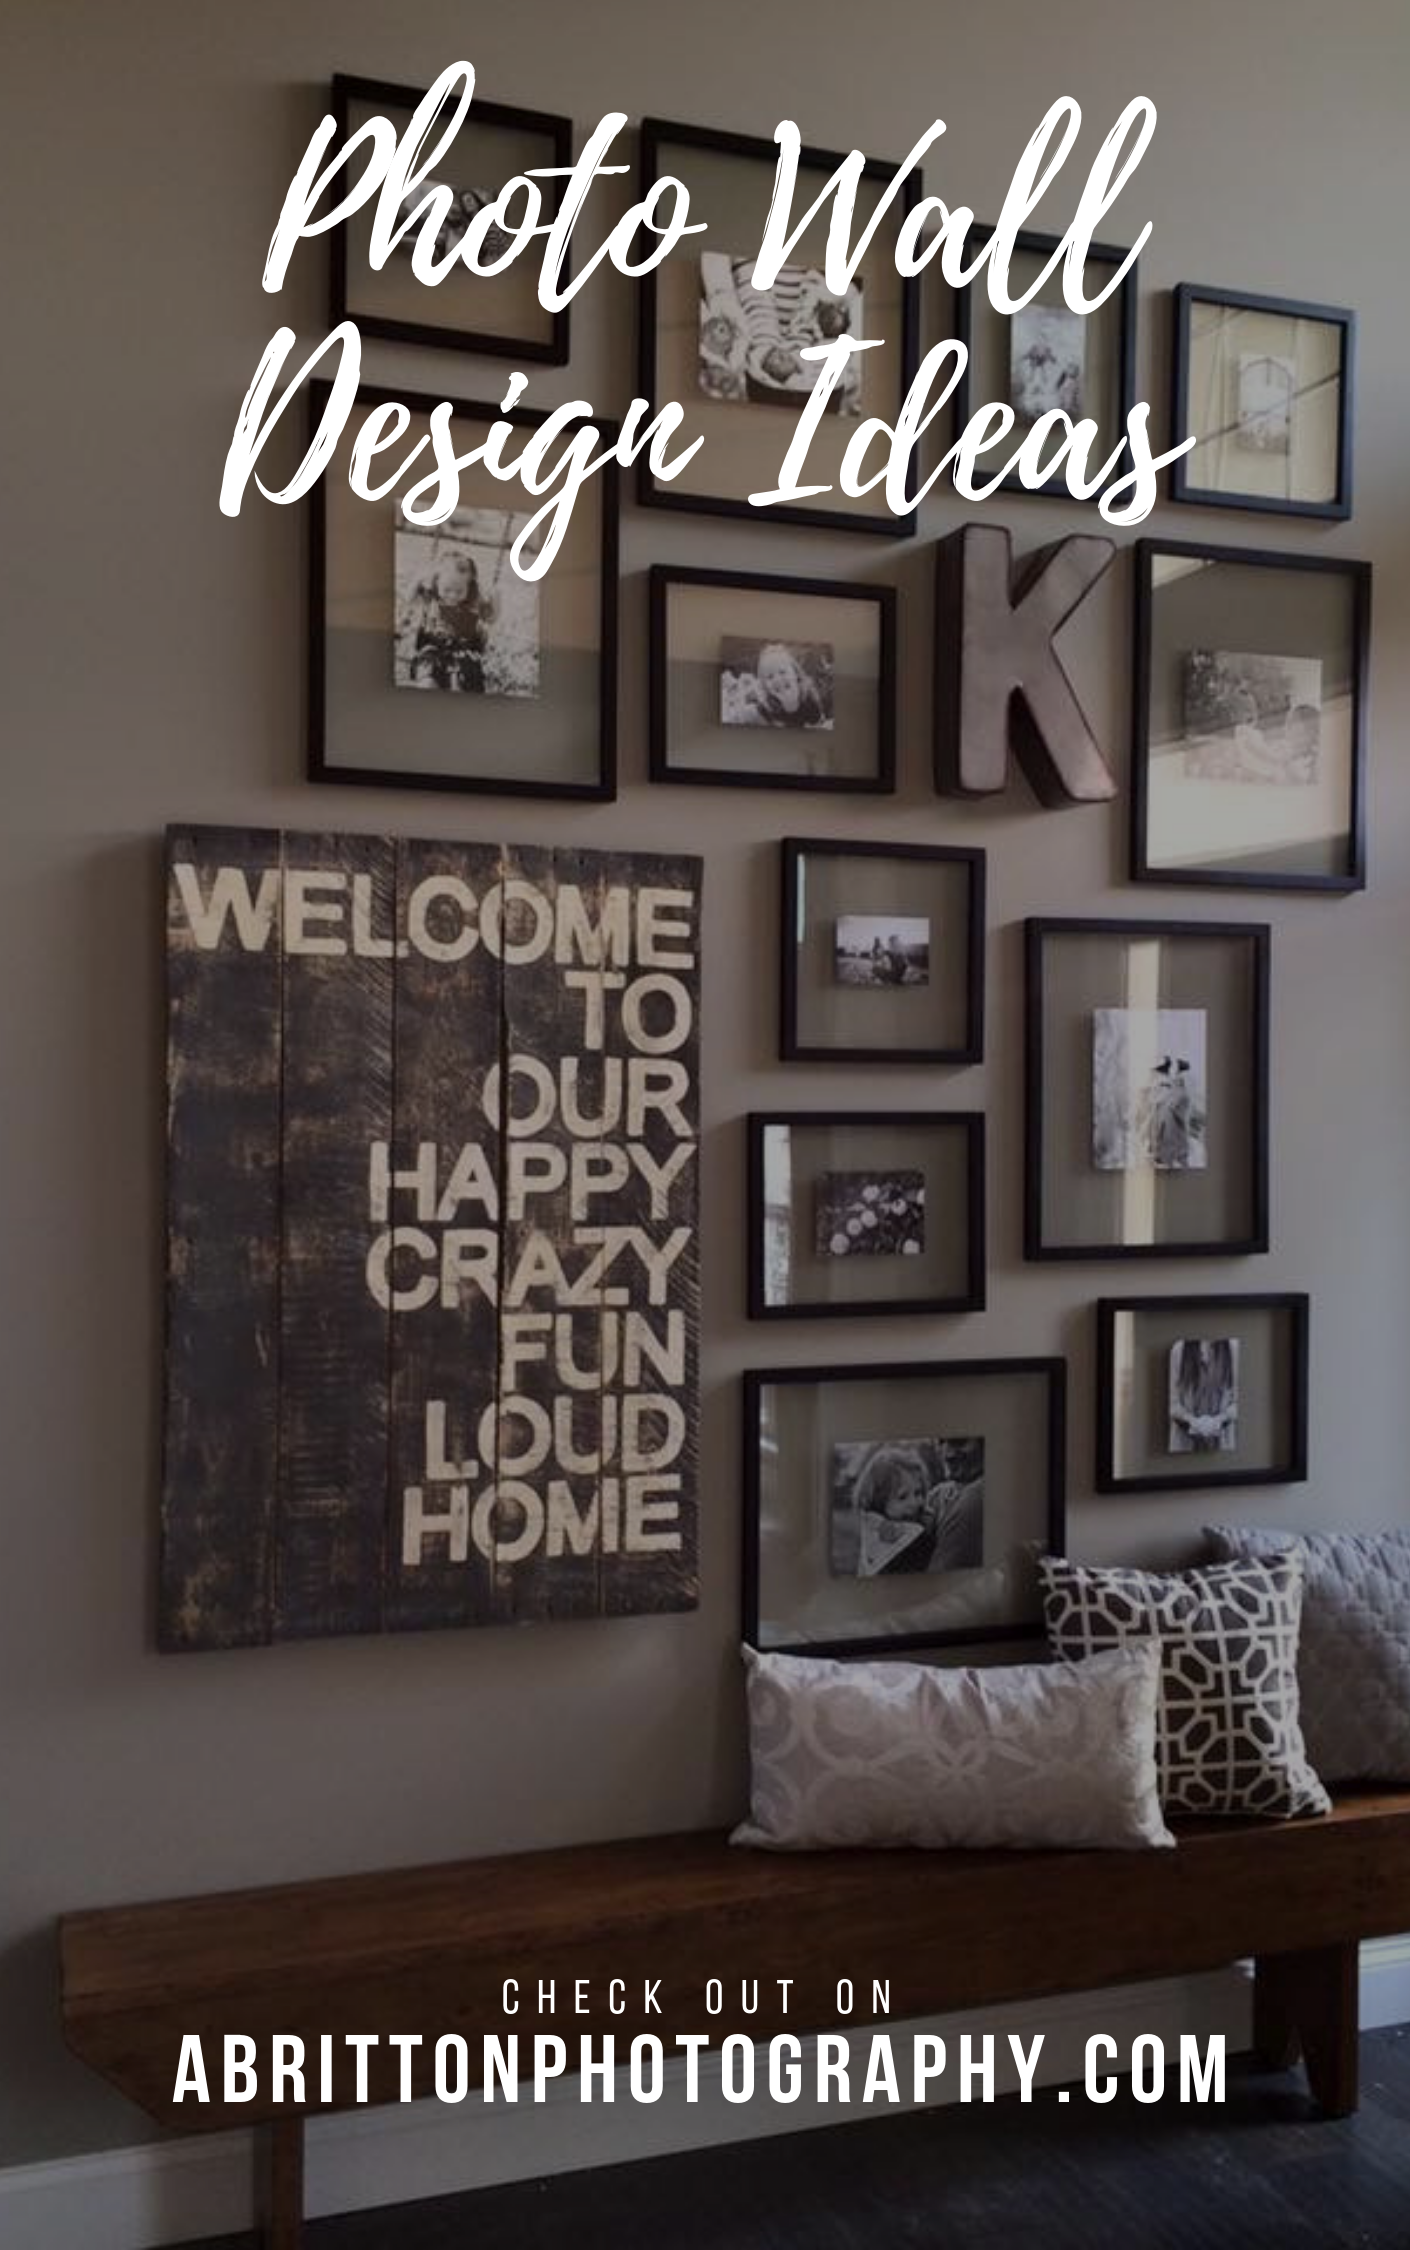 21 Photo Wall Ideas A Guide On How To Display Design Tips Abrittonphotography